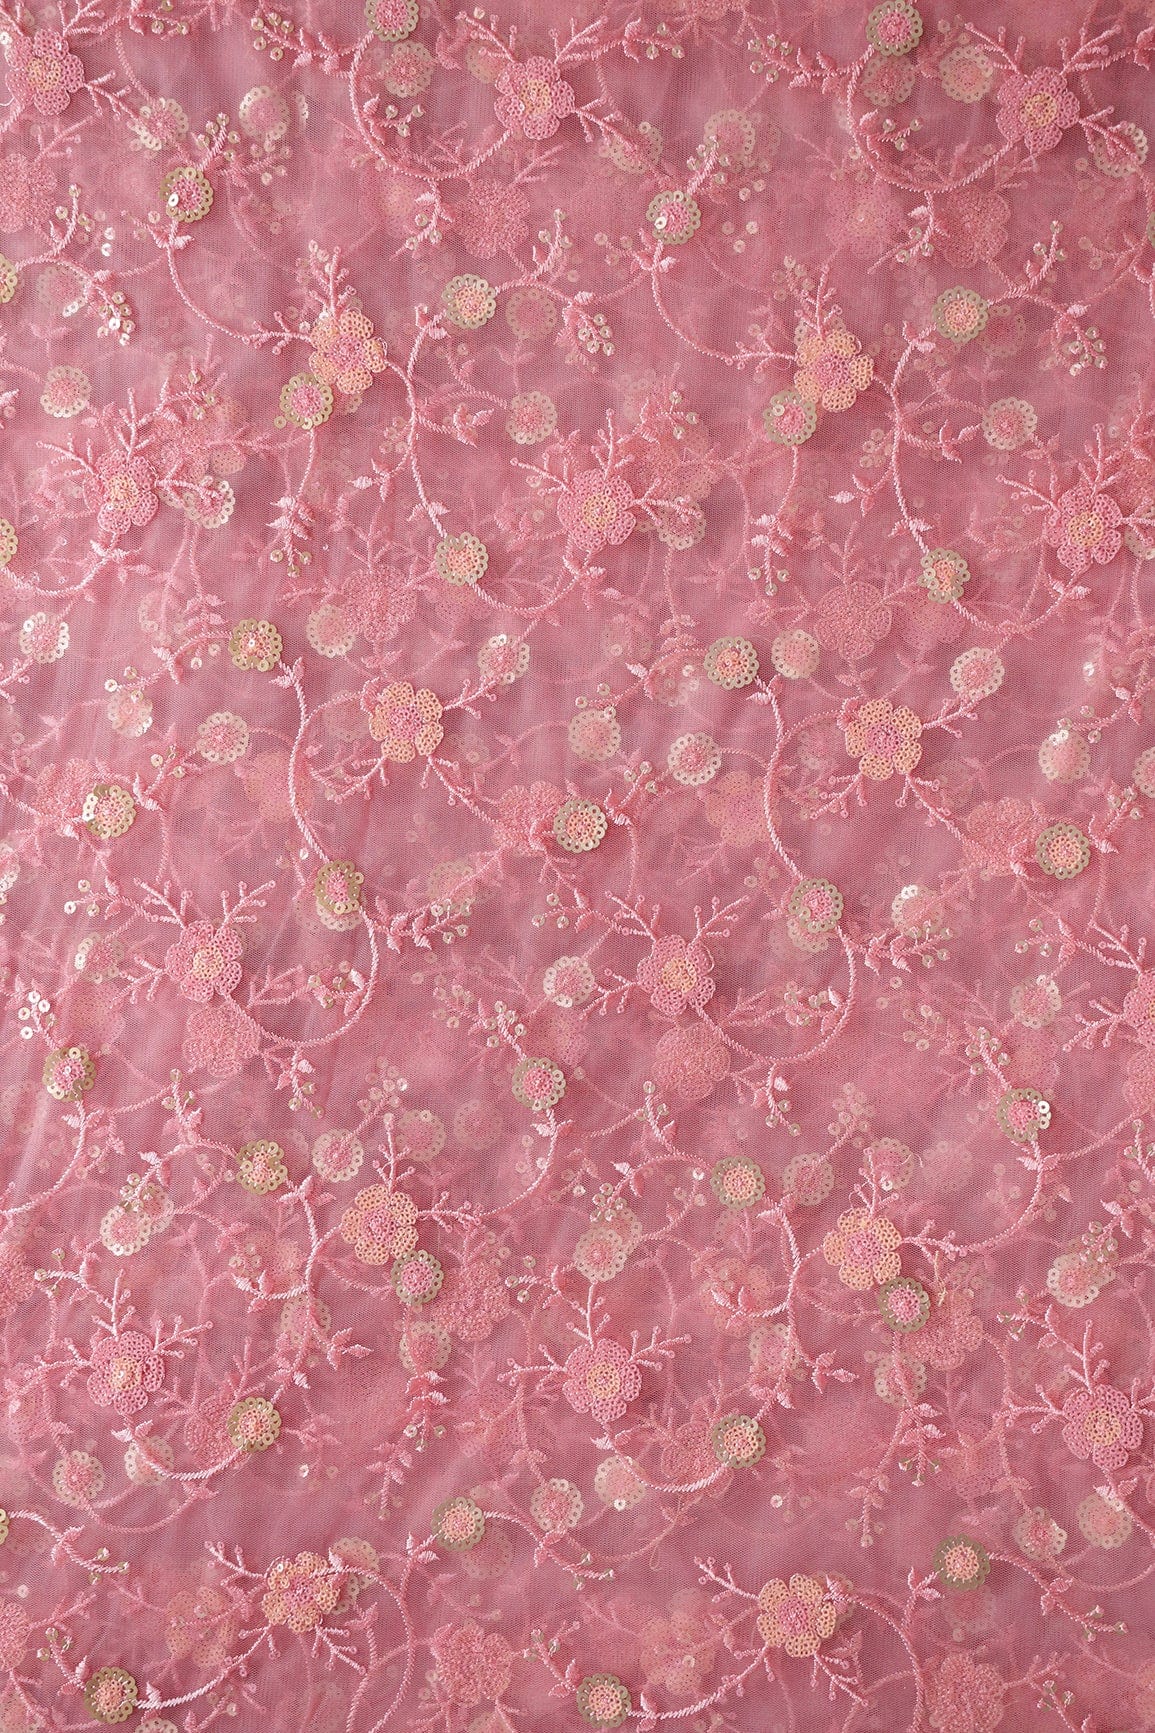 doeraa Embroidery Fabrics Beautiful Multi Color Sequins Floral Embroidery Work On Pink Soft Net Fabric